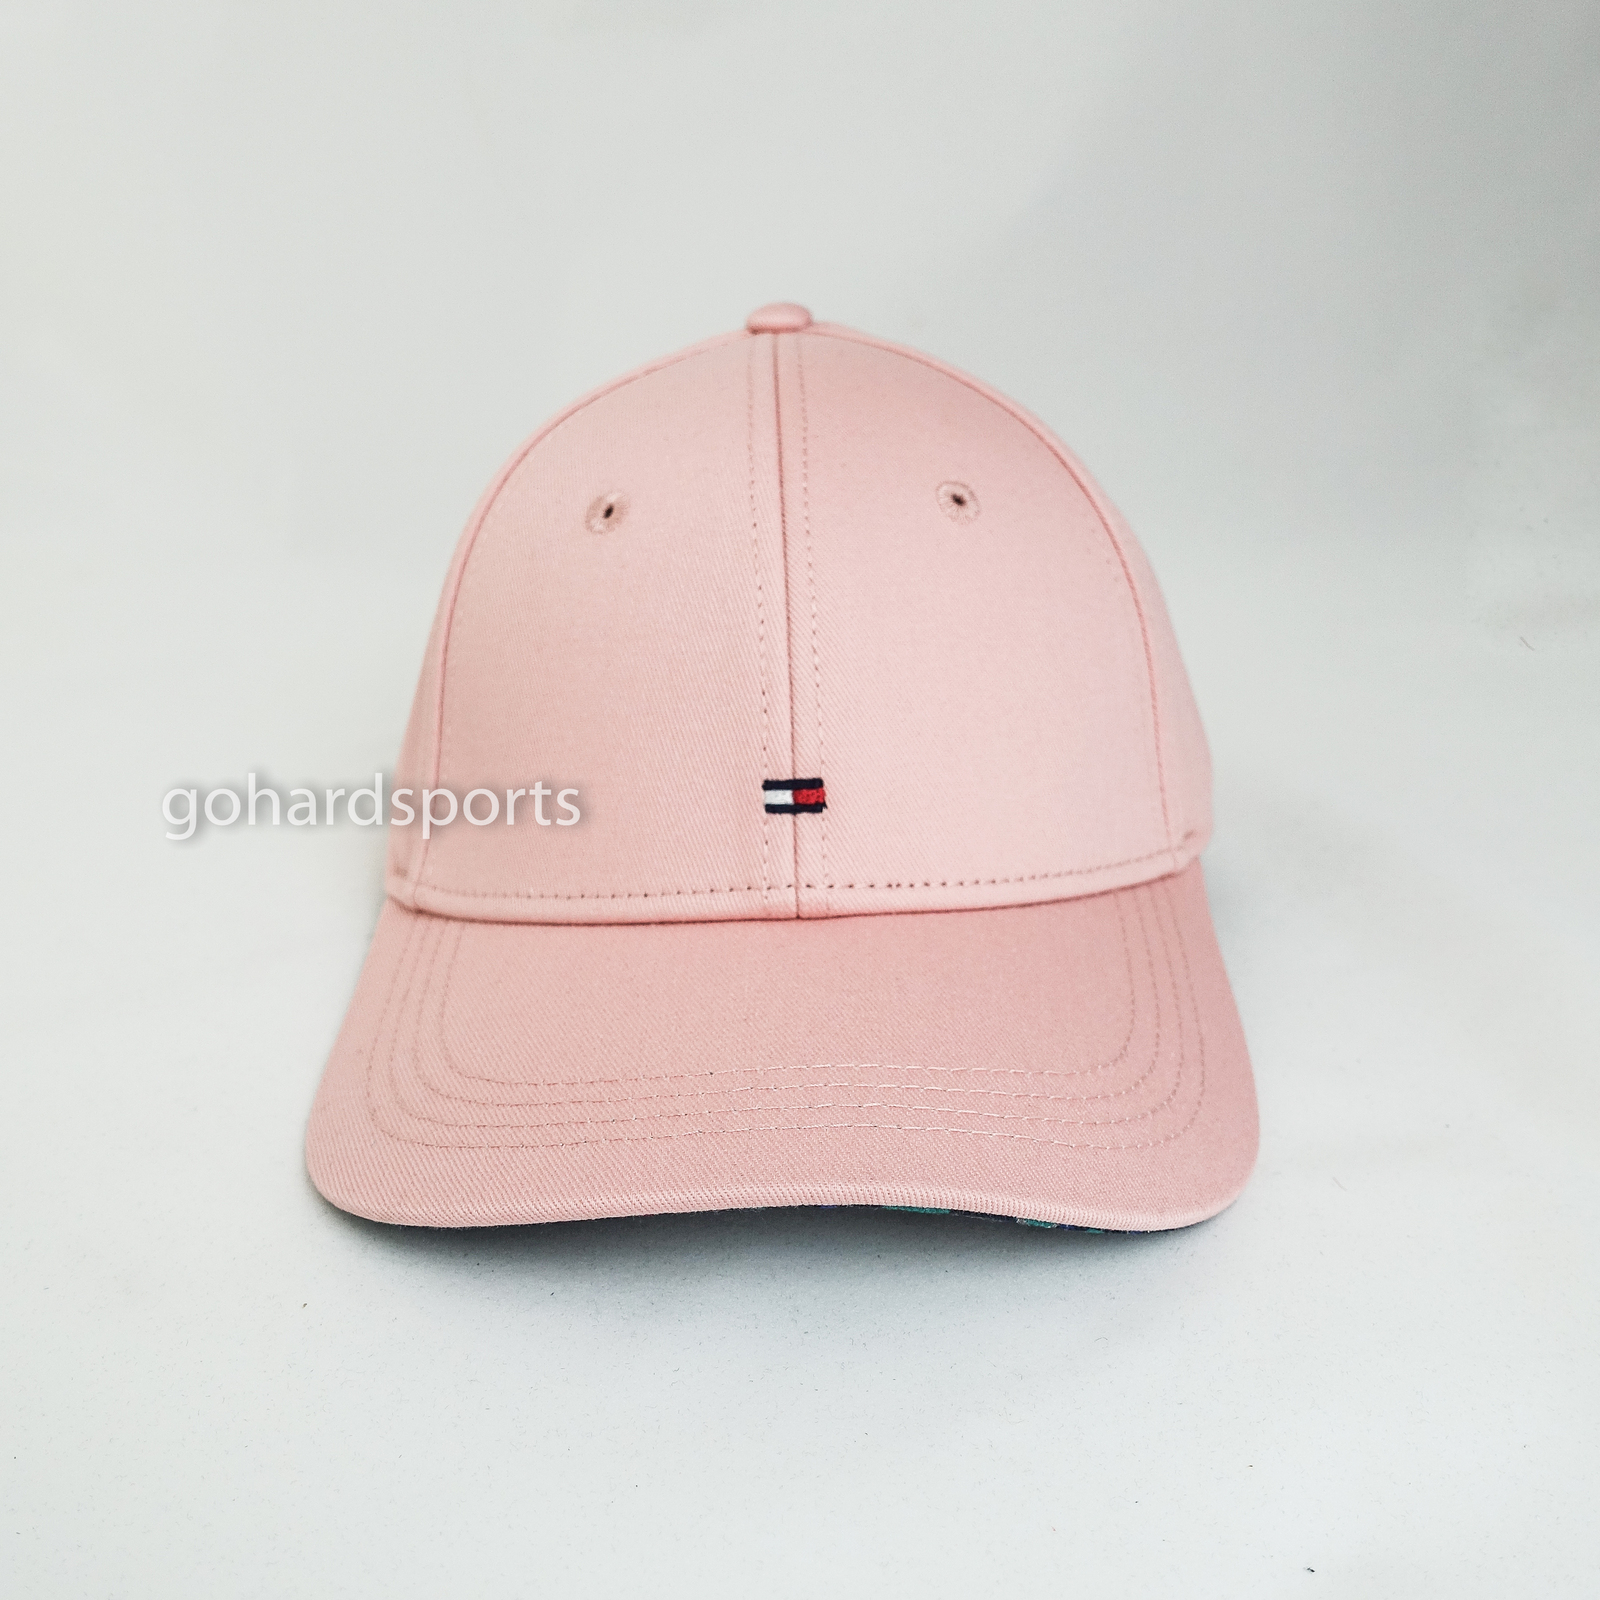 Tommy Hilfiger in Pink Classic Flag Baseball Cap